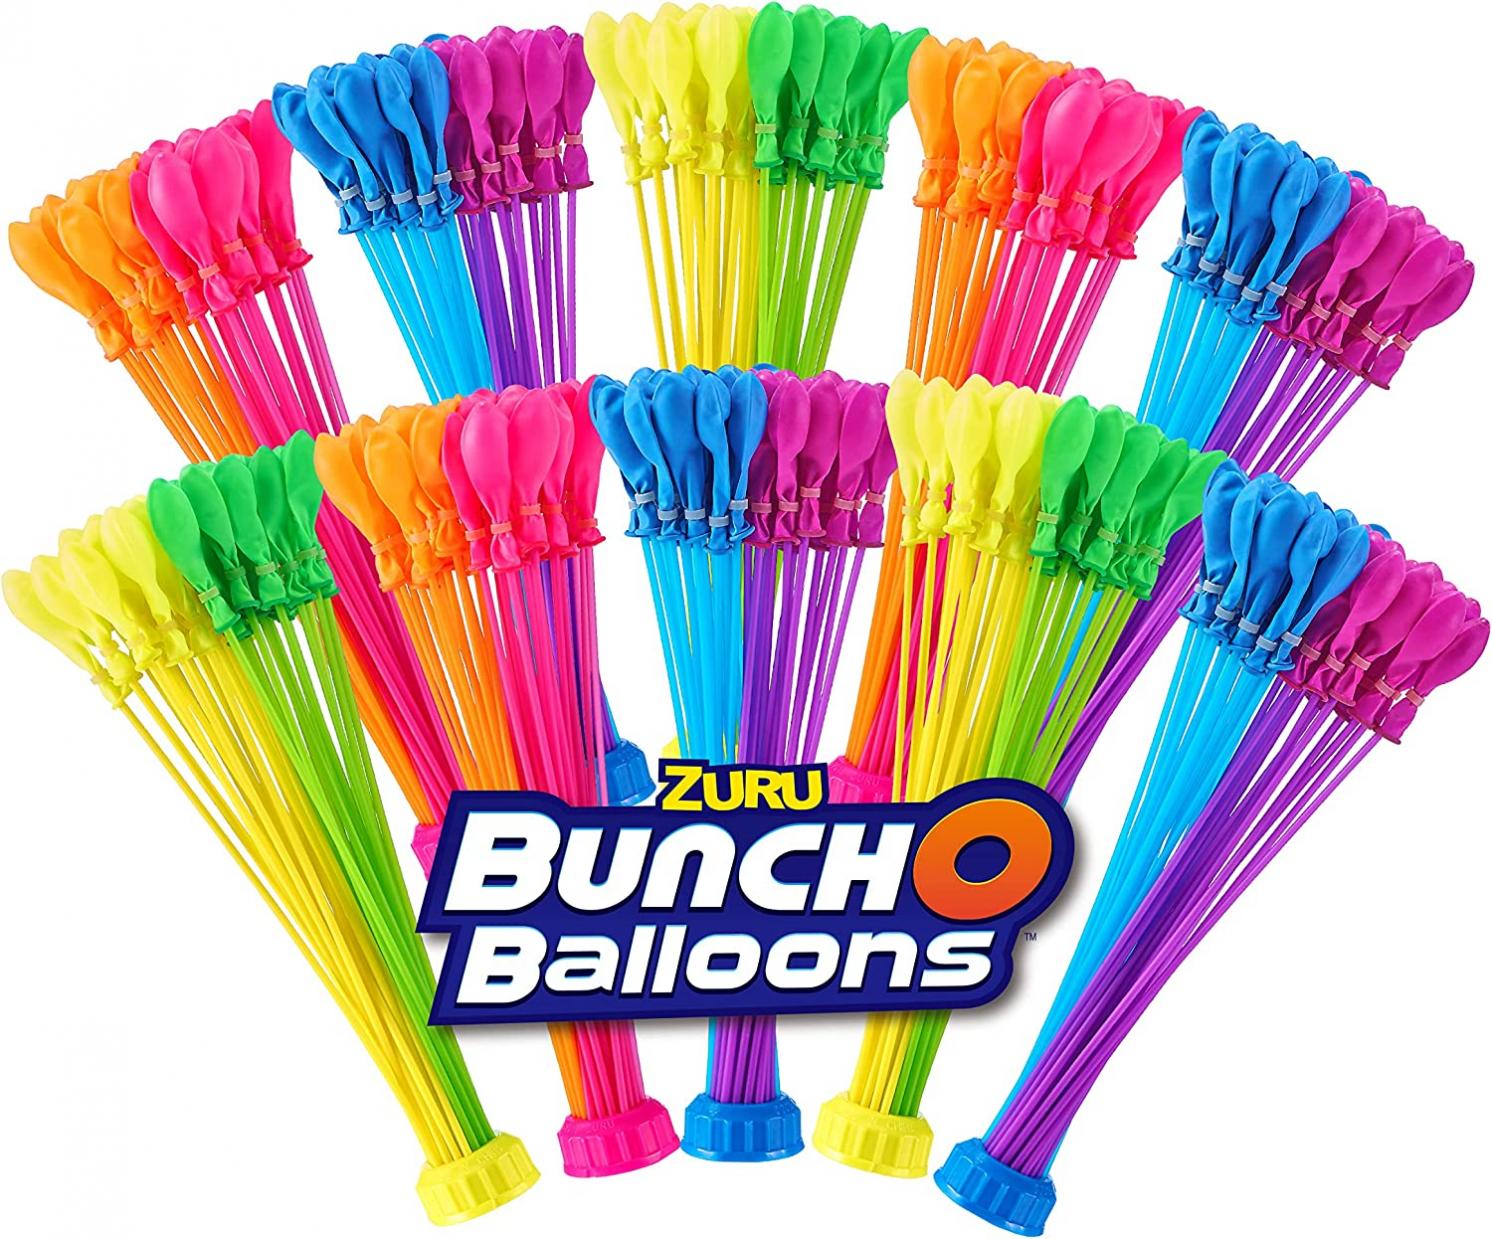 Bunch O Balloons Neon Colors (10 Pack) by ZURU, 350+ Rapid-Filling Self-Sealing Neon Colored Water Balloons for Outdoor Family, Friends, Children Summer Fun (10 Pack)